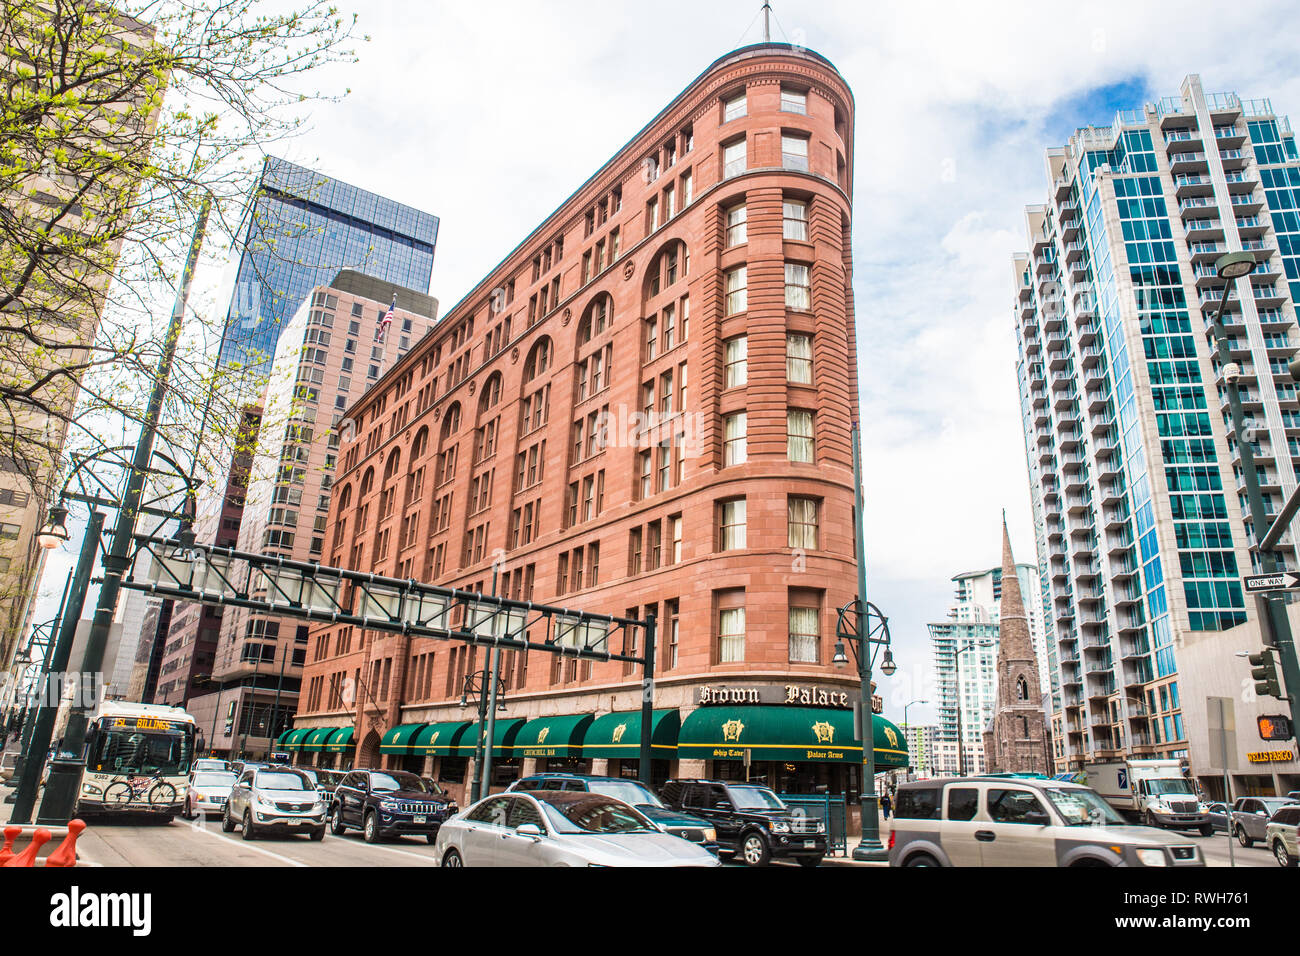 DENVER, COLORADO - APRIL 30. 2018: Street scene from the city of Denver Colorado with historic Brown Palace hotel and spa in view Stock Photo